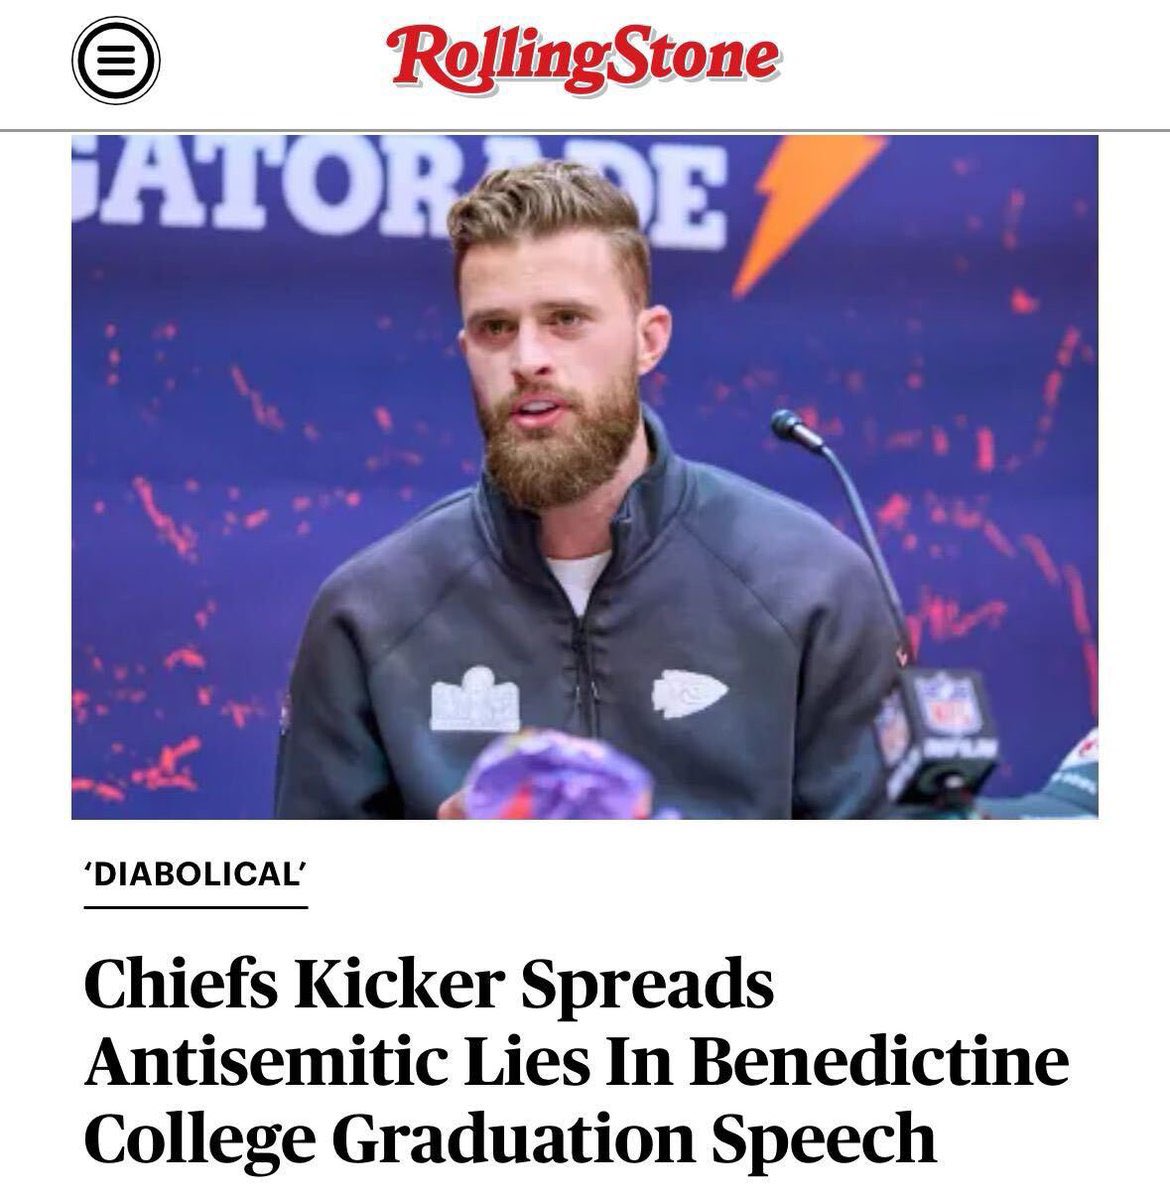 Rolling Stone brands Chiefs Kicker Harrison Butker an anti-Semite for Benedictine college speech condemning sexual immorality. In the speech, Butker did not mention Jews once. Follow: @AFpost